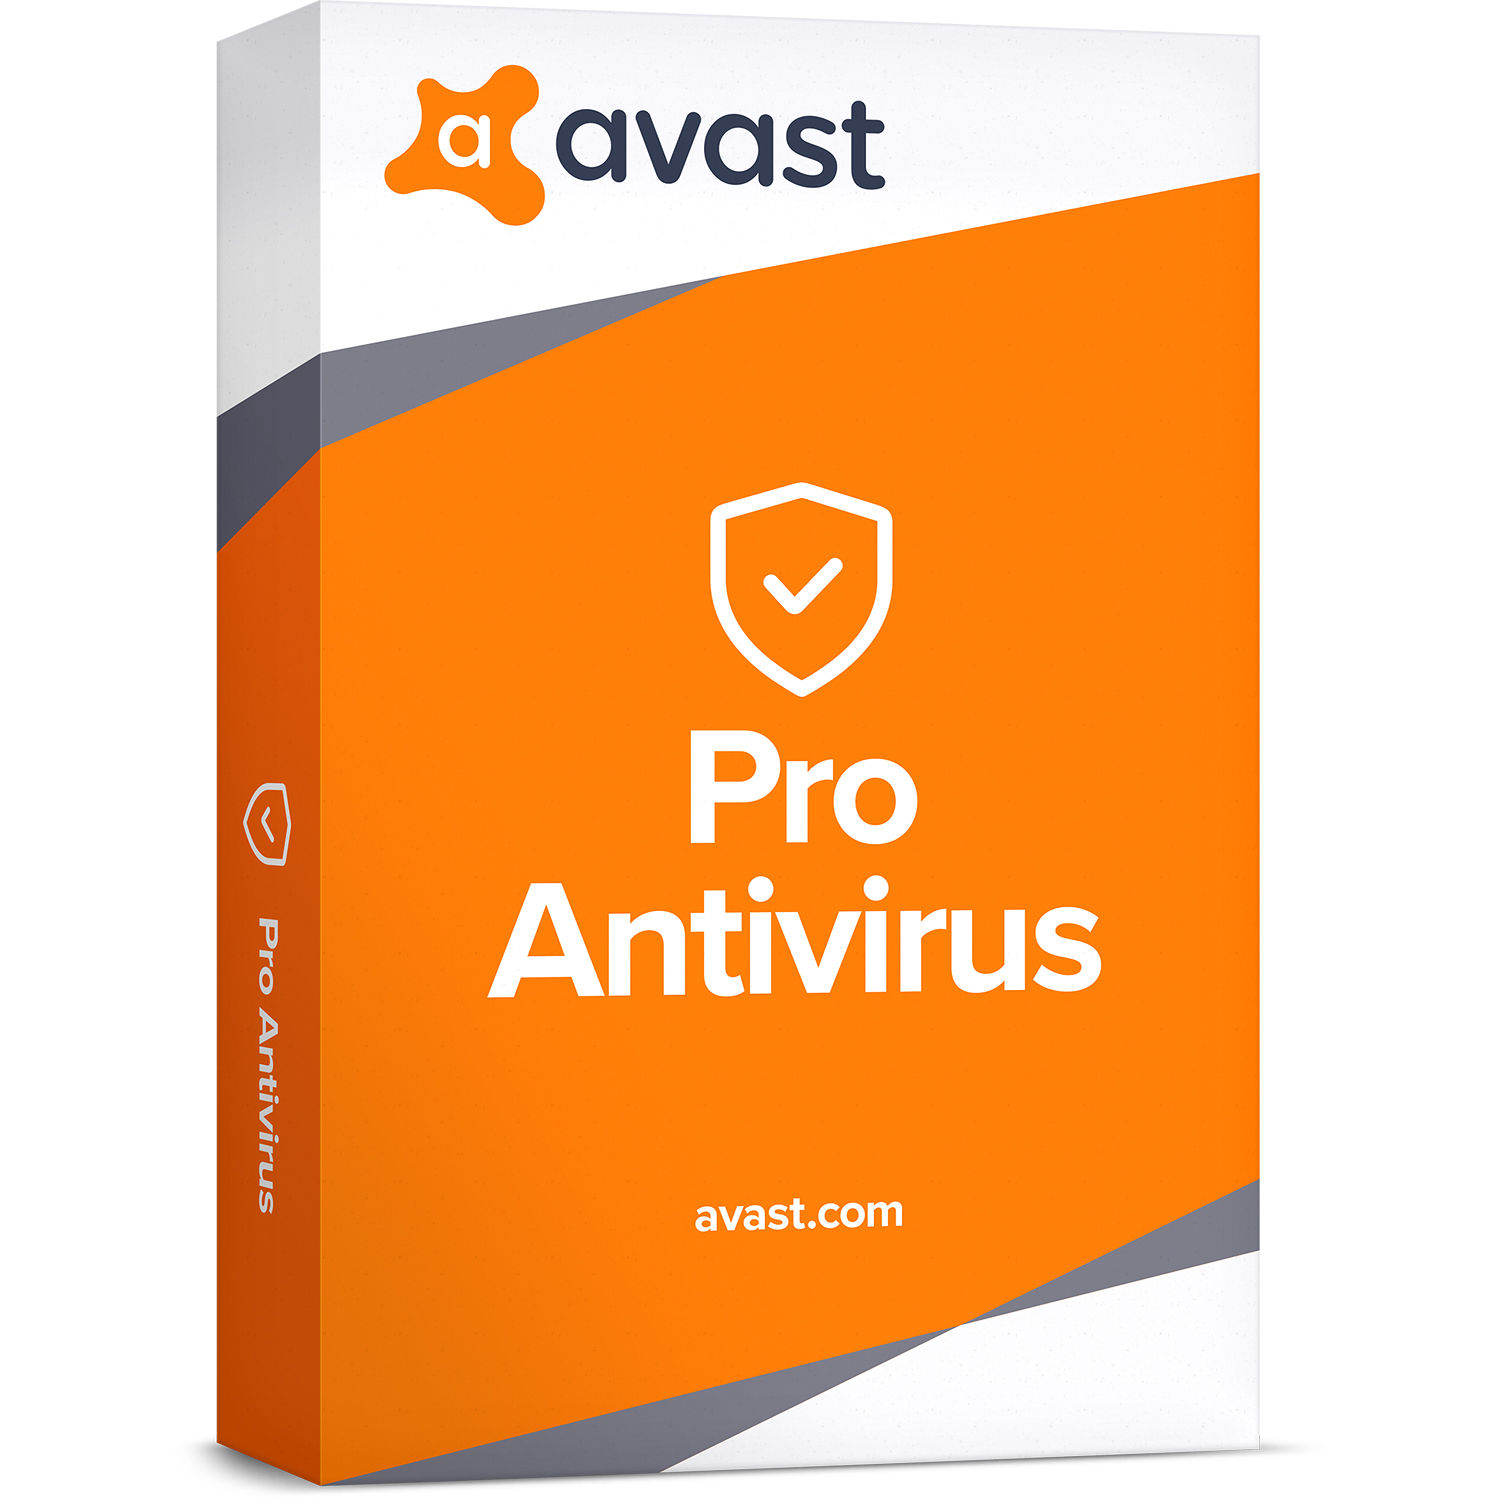 is avast safe